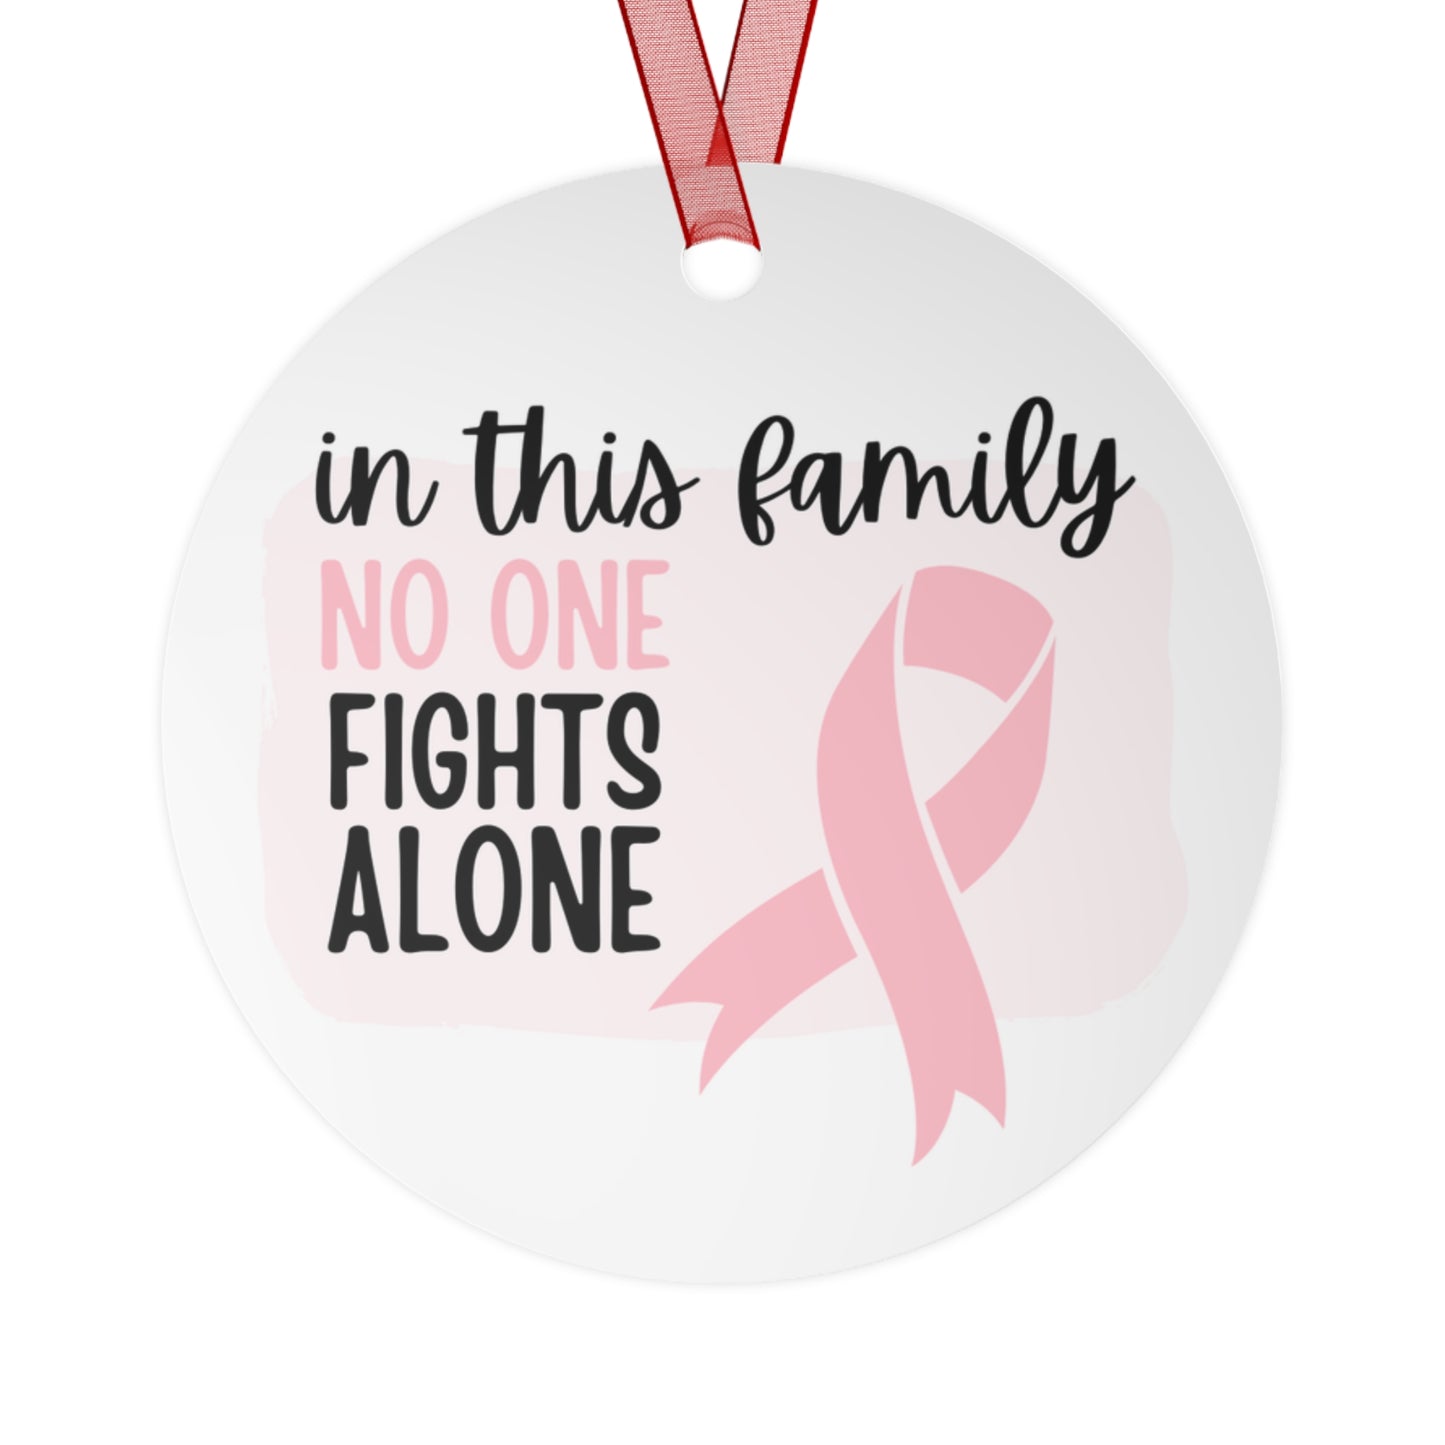 Breast Cancer Pink Ribbon Awareness Ornament -In this family no one fights alone- Family Support - Support for friend